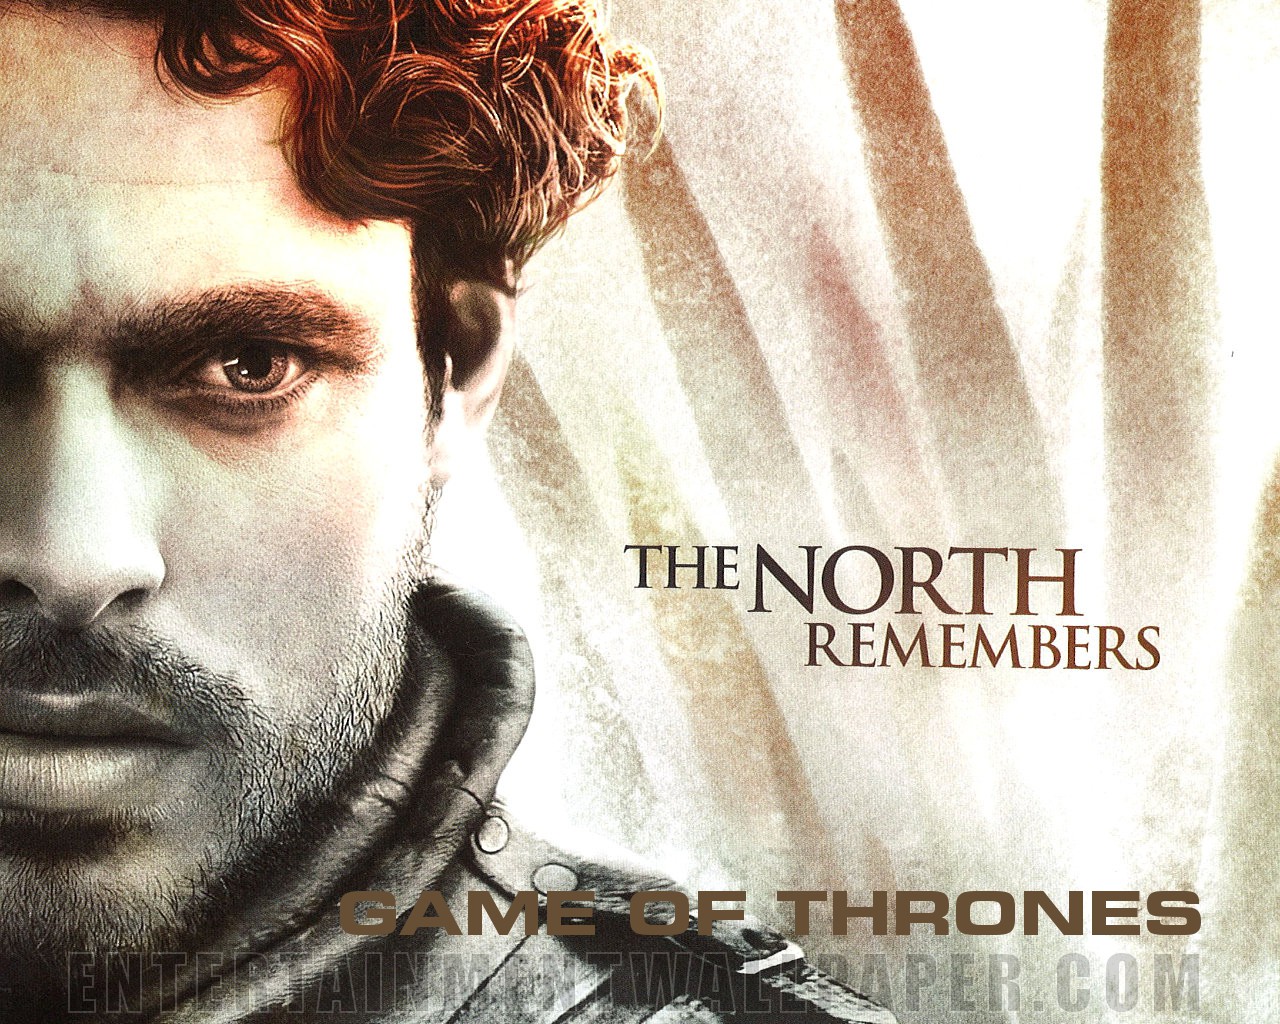 game of thrones s07e06 torrent